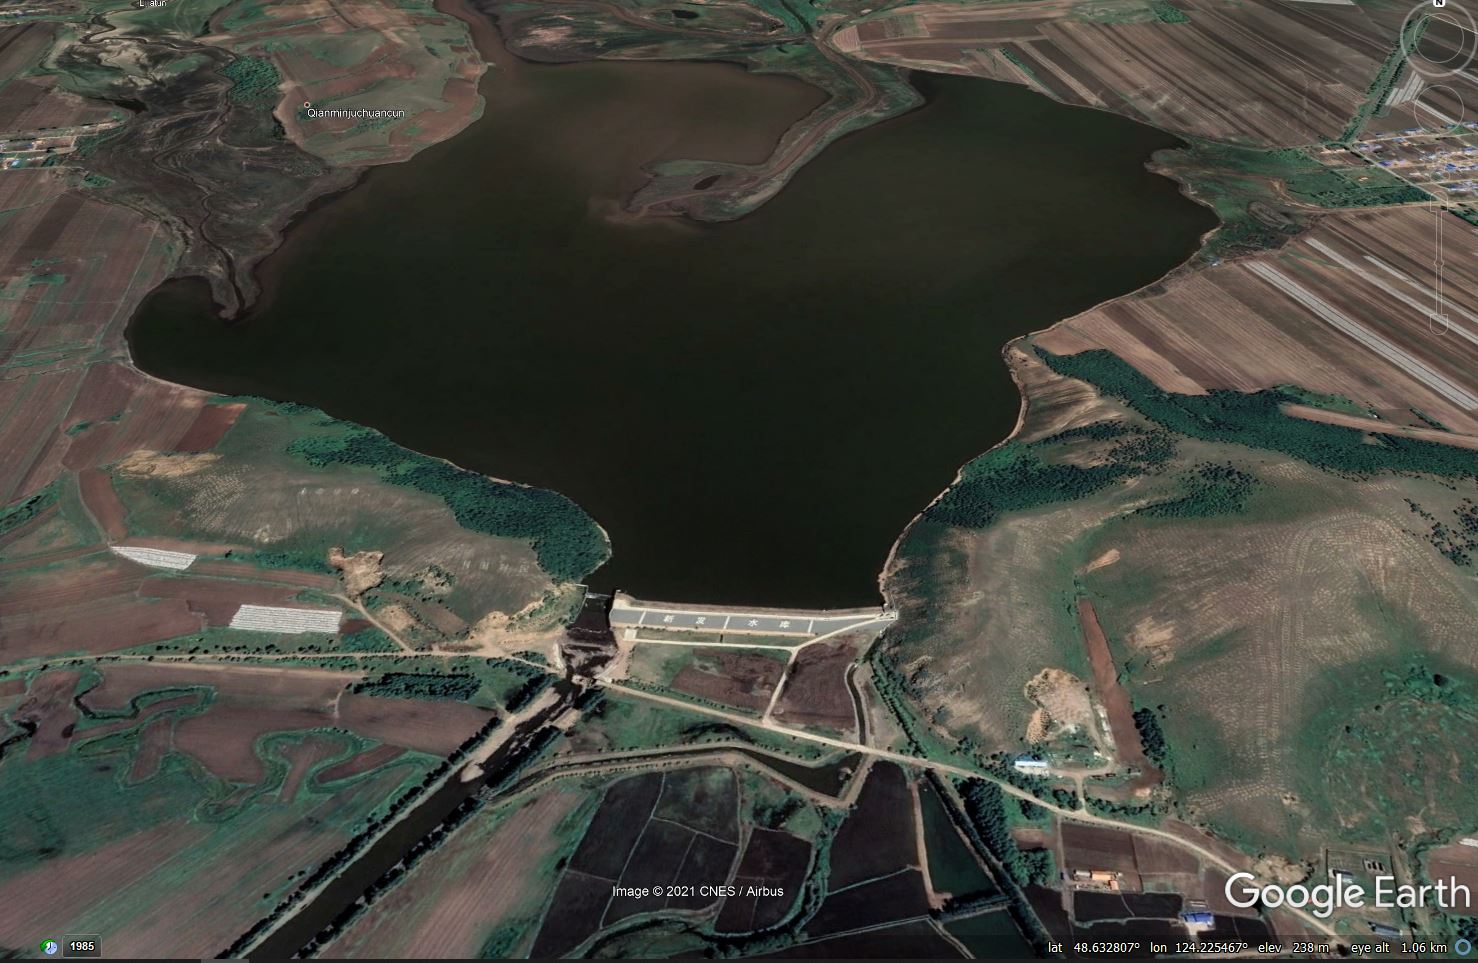 Google Earth image of the Xinfa Dam in Hulunbuir, Inner Mongolia, China, which collapsed on 18 July 2021.